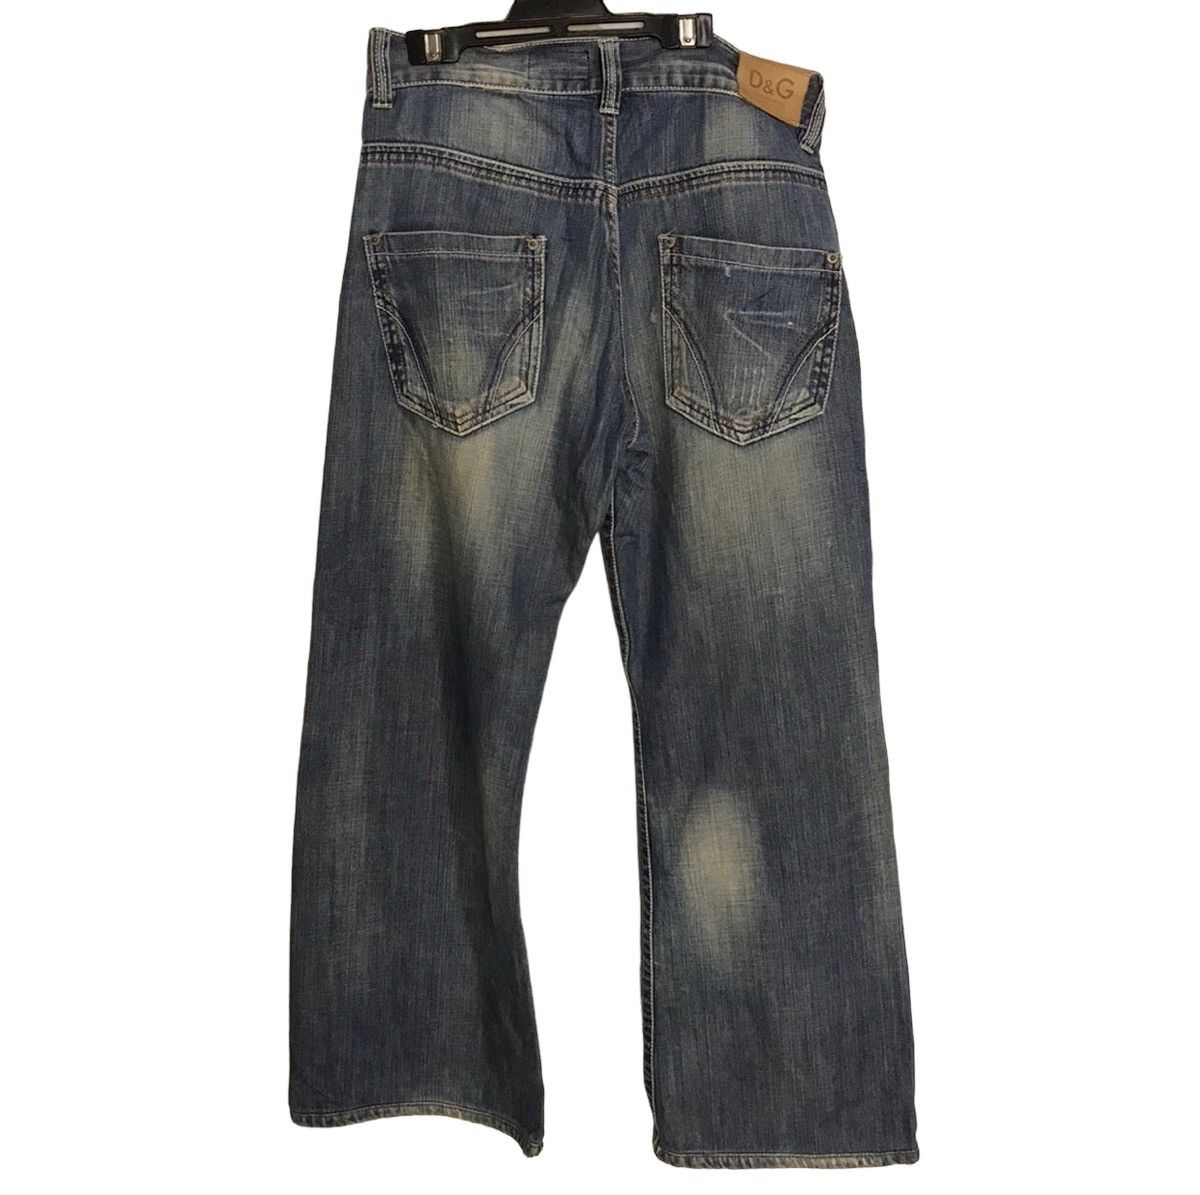 D&G denim pants made in italy - 2